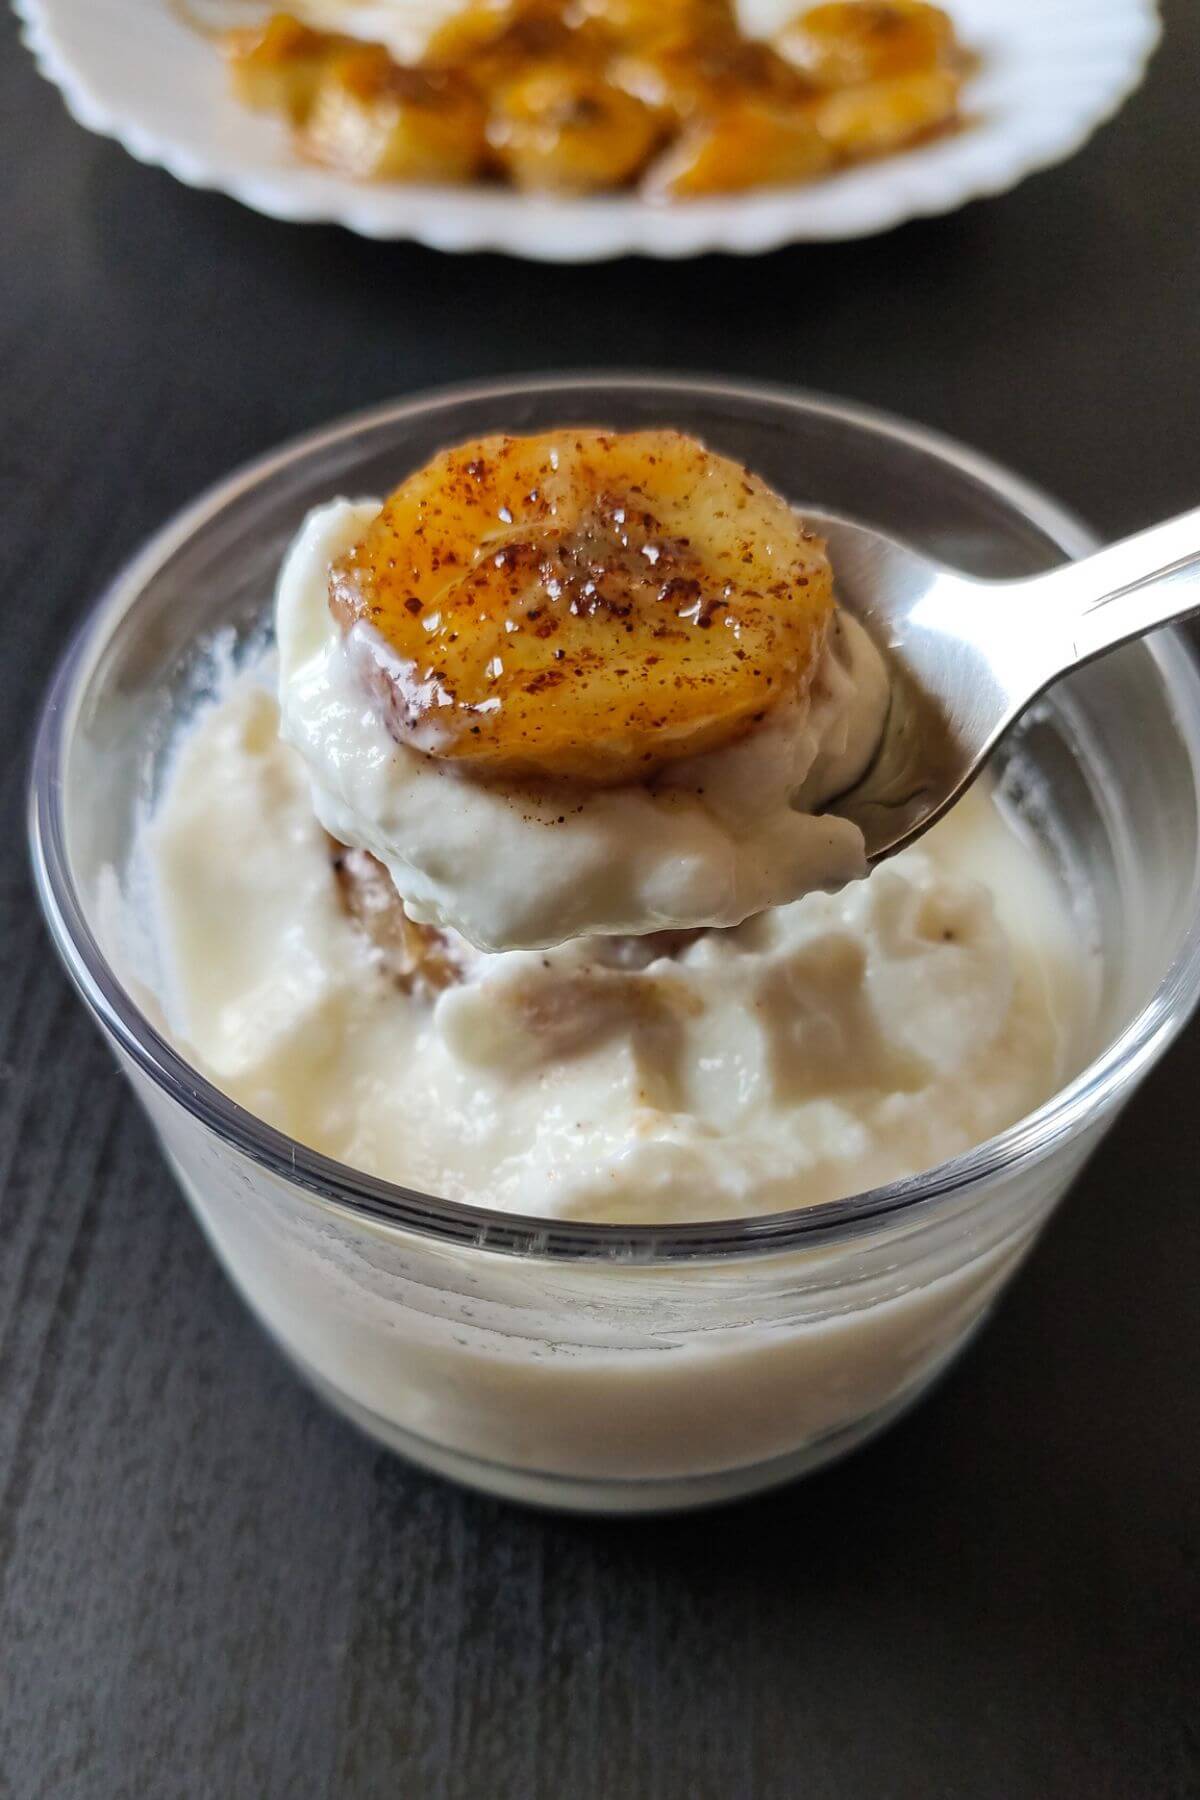 A slice of caramelized banana on top of a spoon full of yogurt